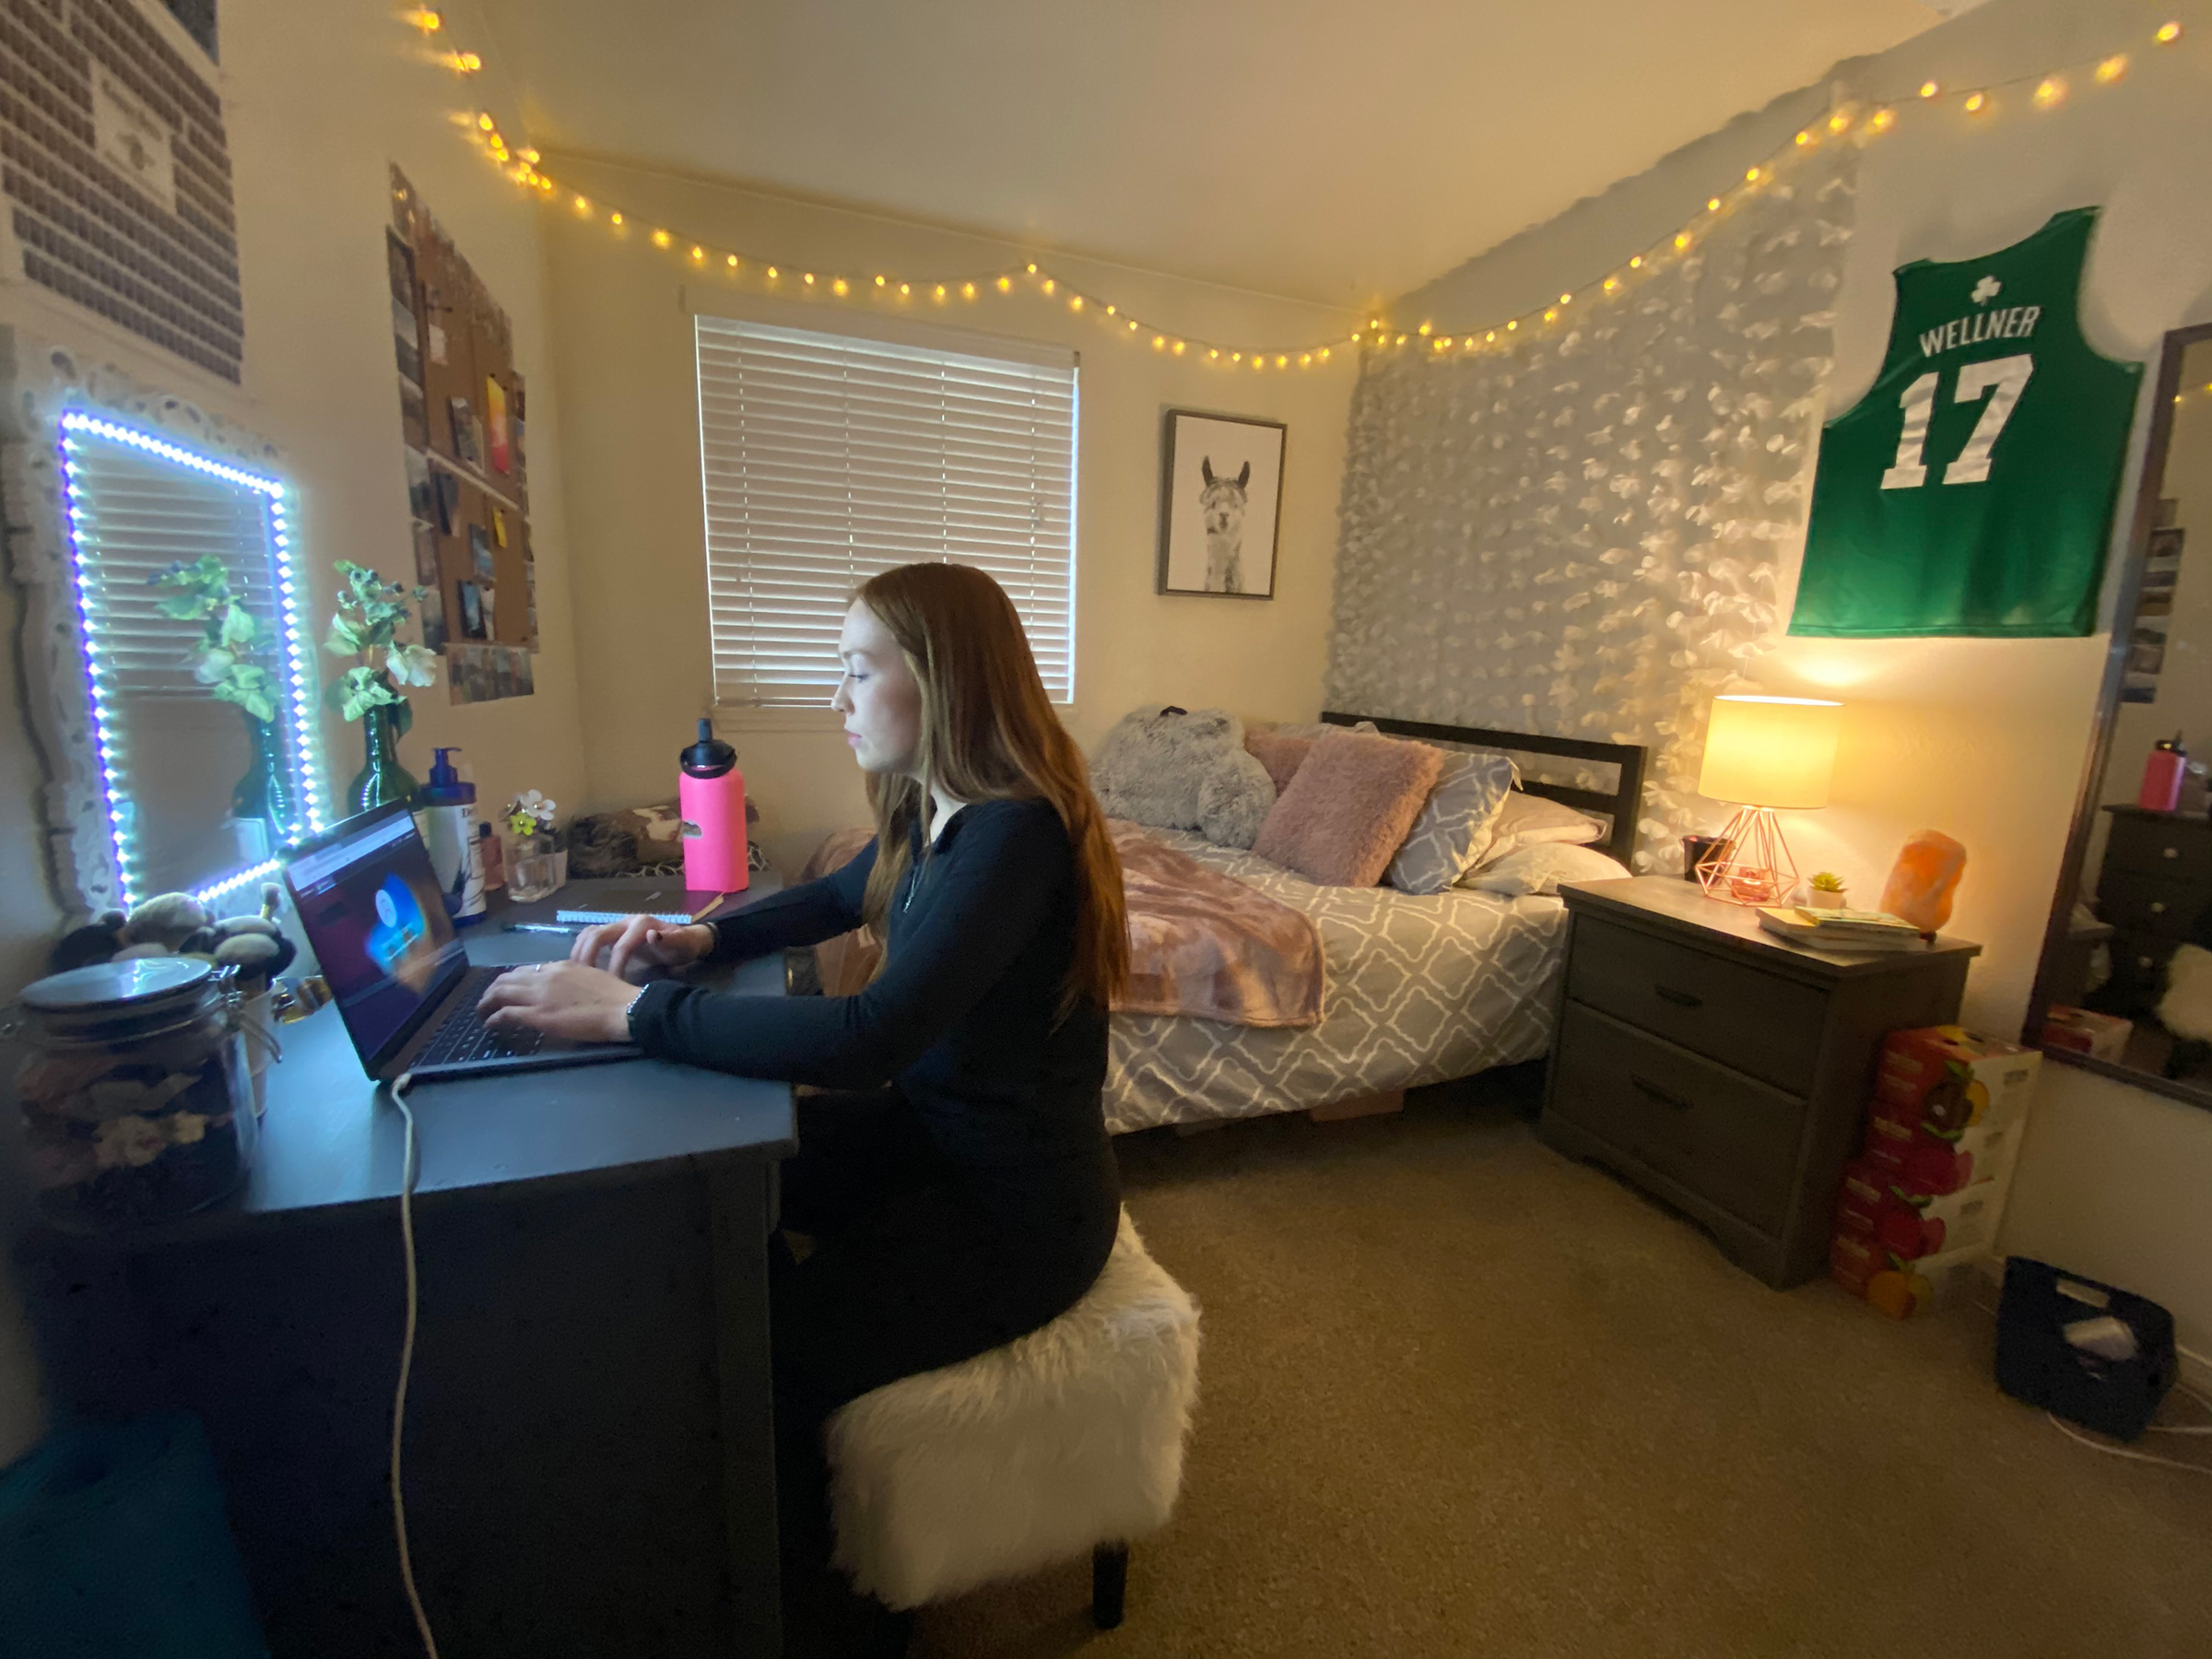 Molly Wellner, a student at Washington State University in Pullman, Wash., at her desk in her off-campus housing. Wellner and her roommates all tested positive for COVID-19 this fall (Courtesy Molly Wellner)